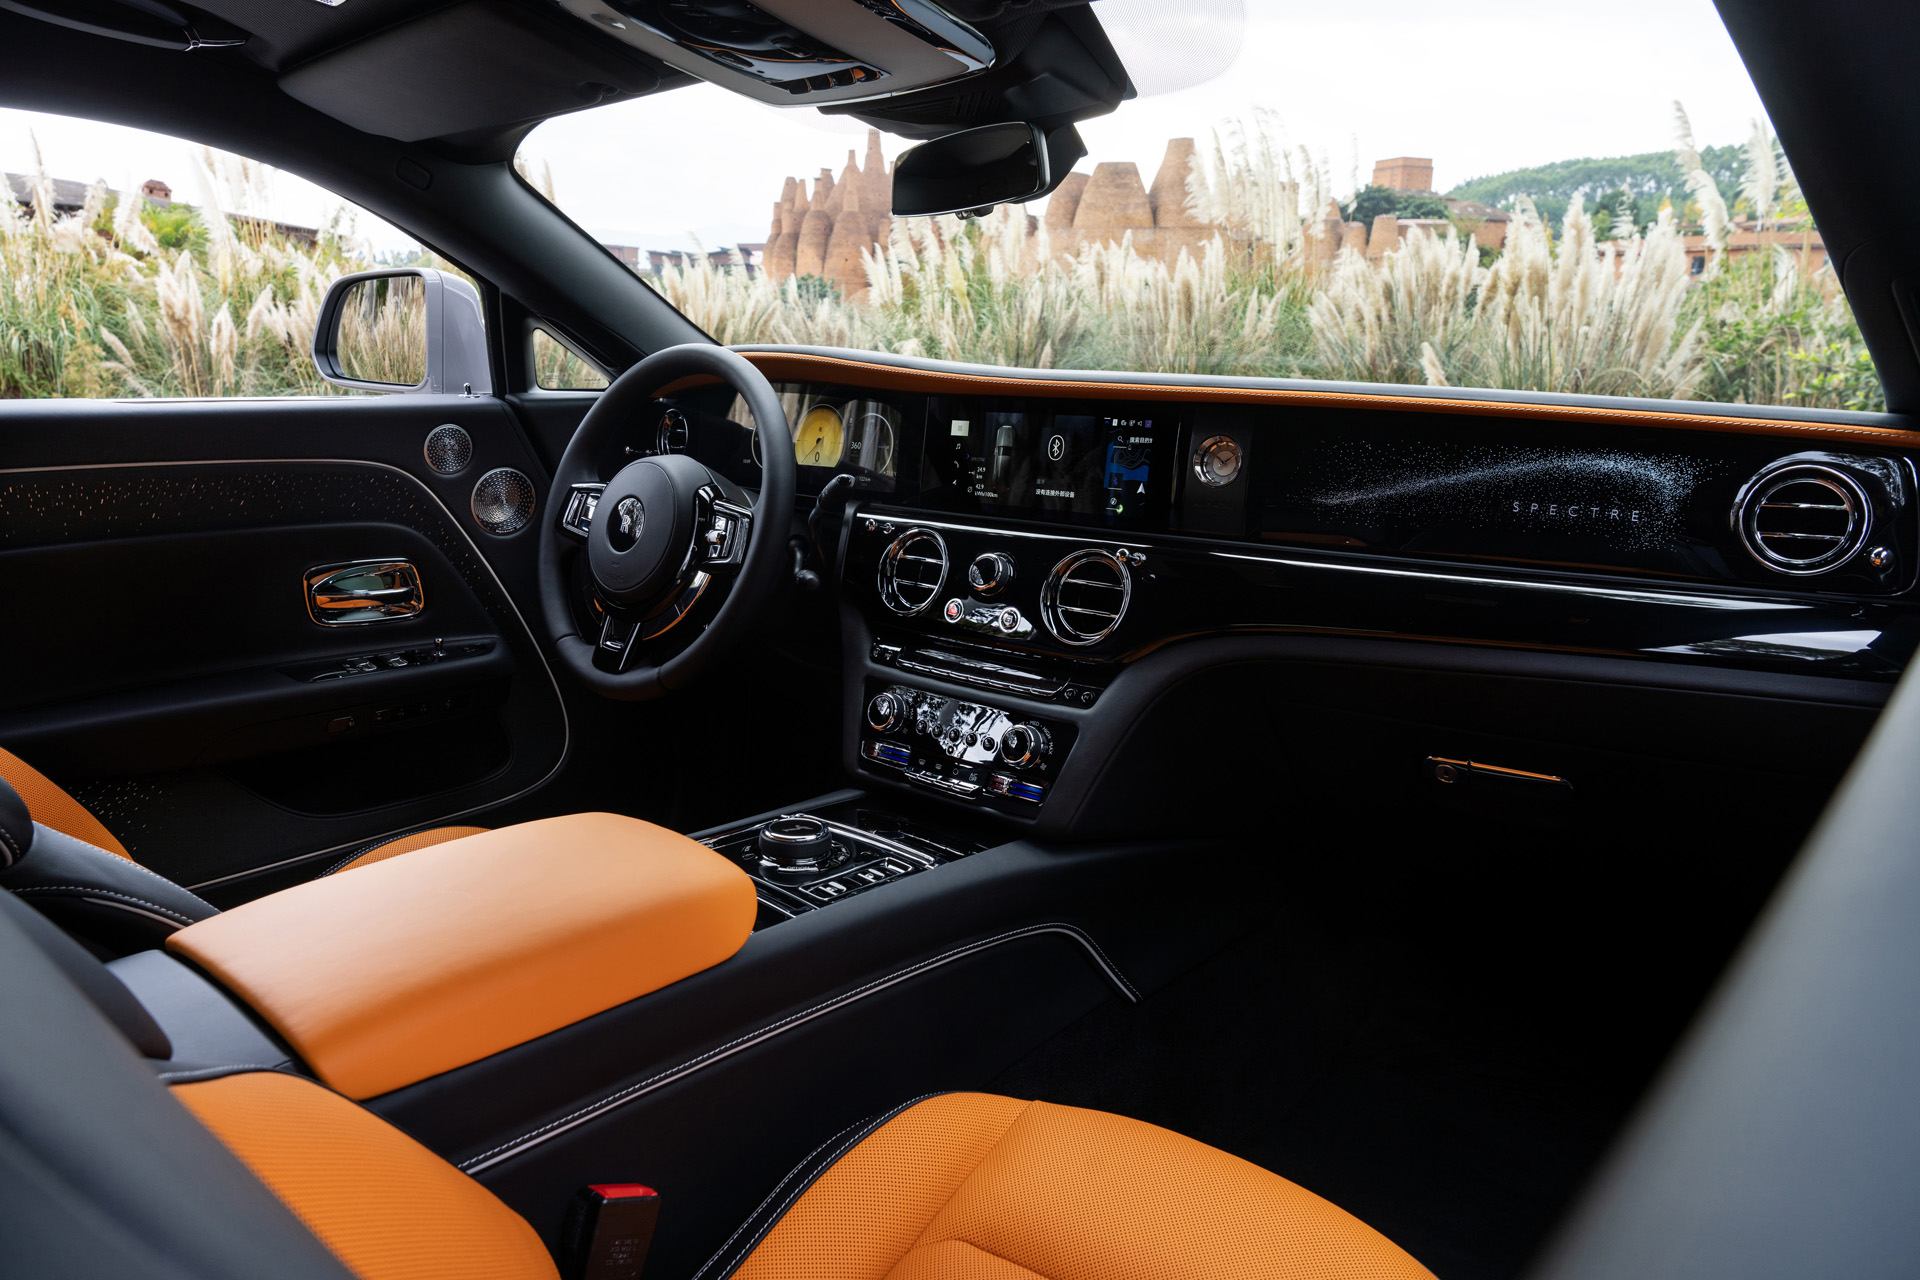 The interior of the Rolls Royce Spectre